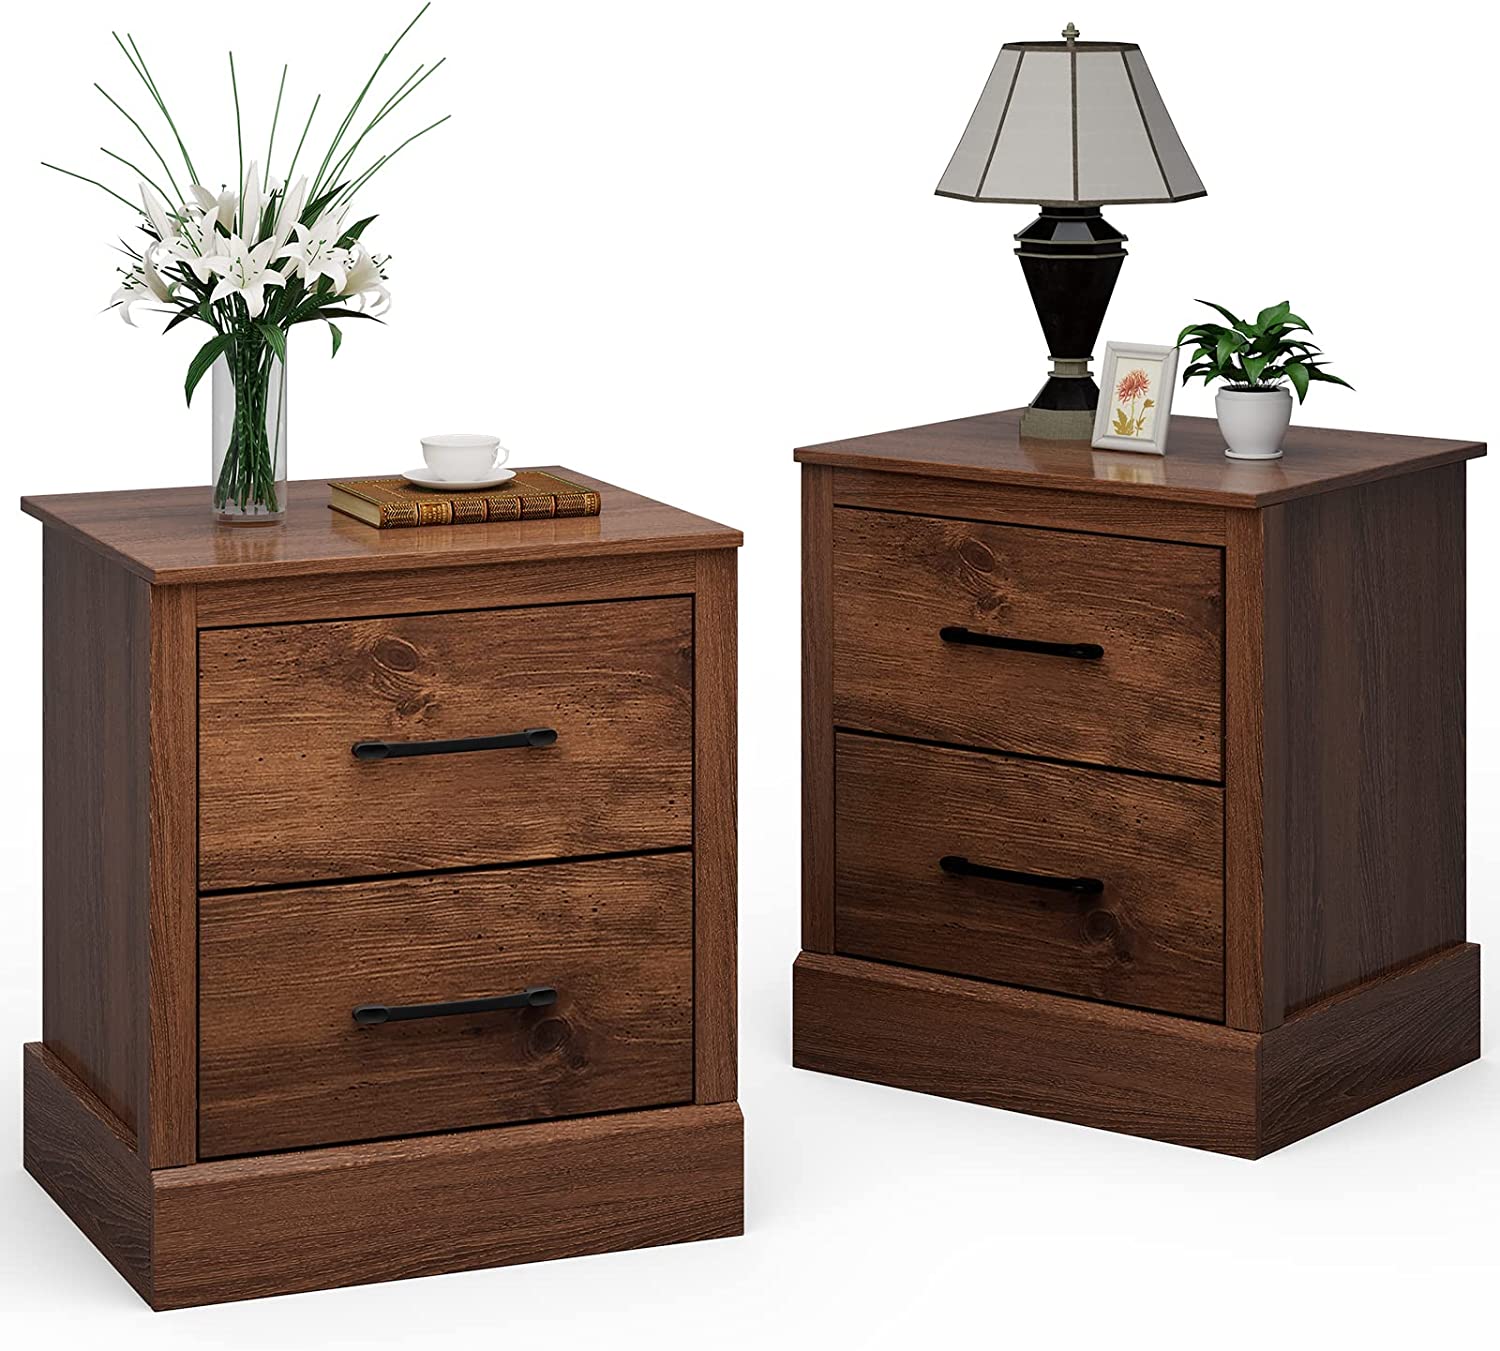 Giantex Farmhouse Nightstand Set of 2, Wood Bedside Table with 2 Storage Drawers